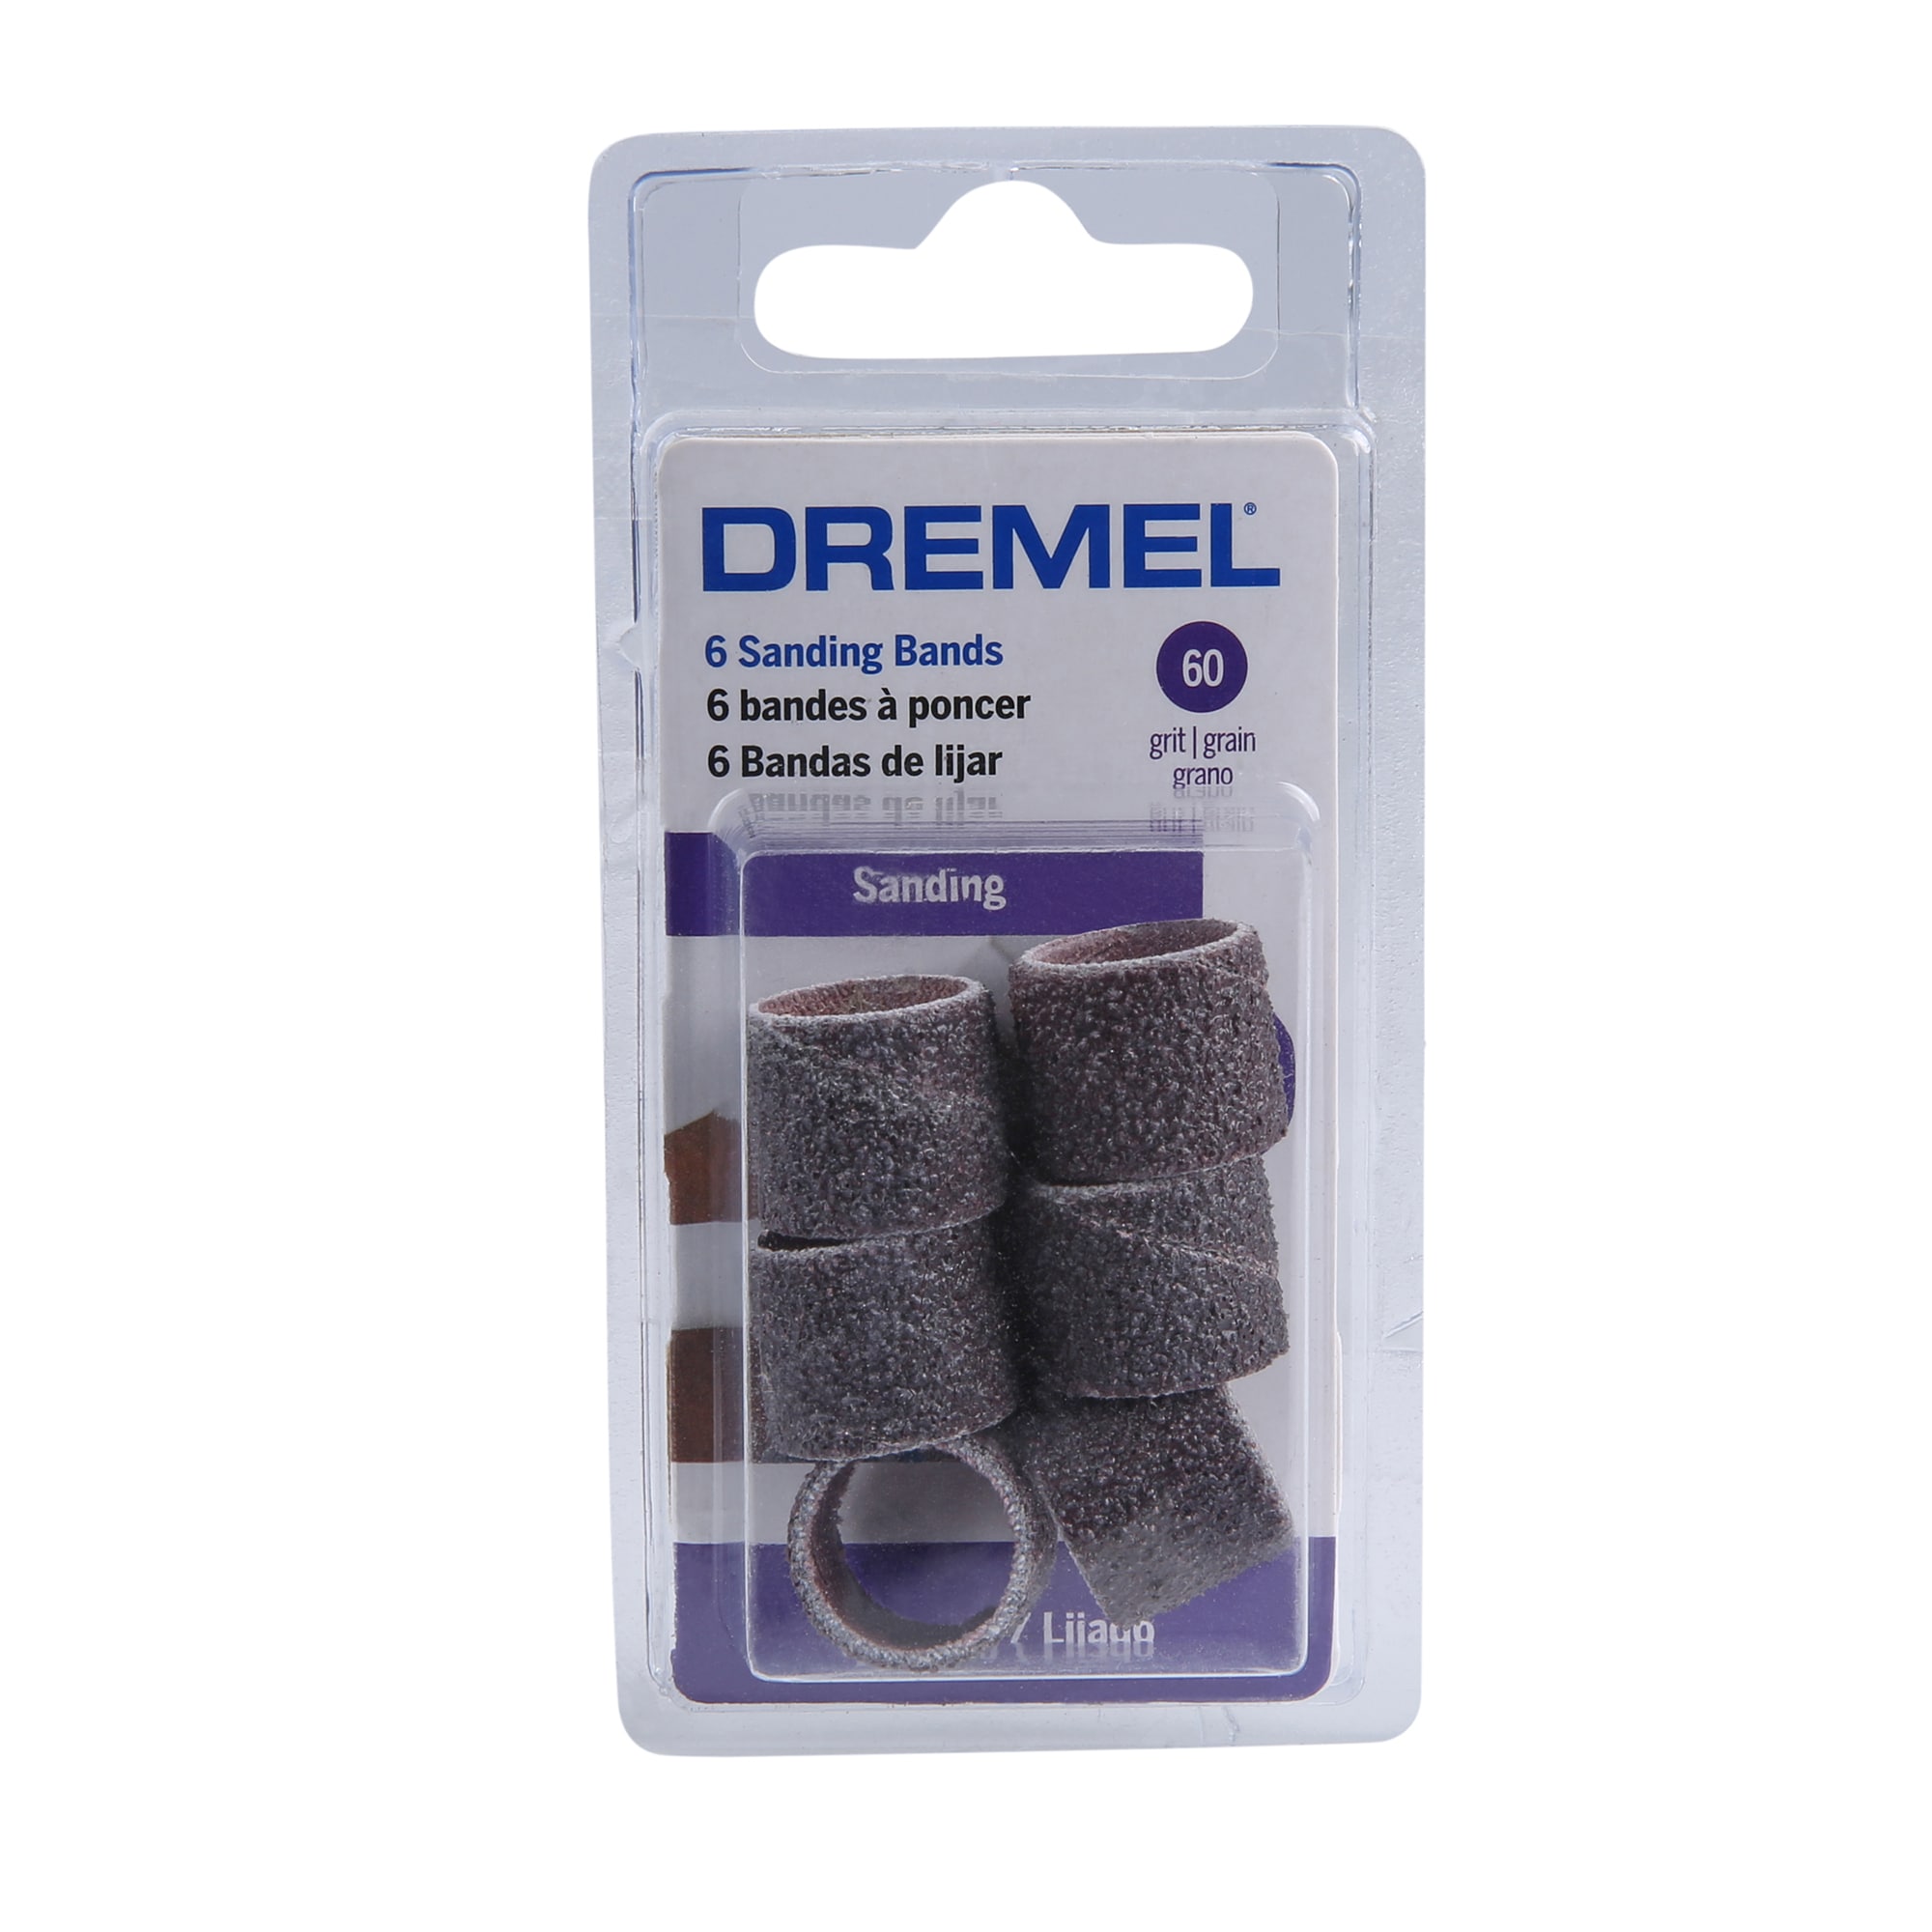 Shop Dremel 7350 Cordless 4V Pet Grooming Rotary Tool Kit with 5